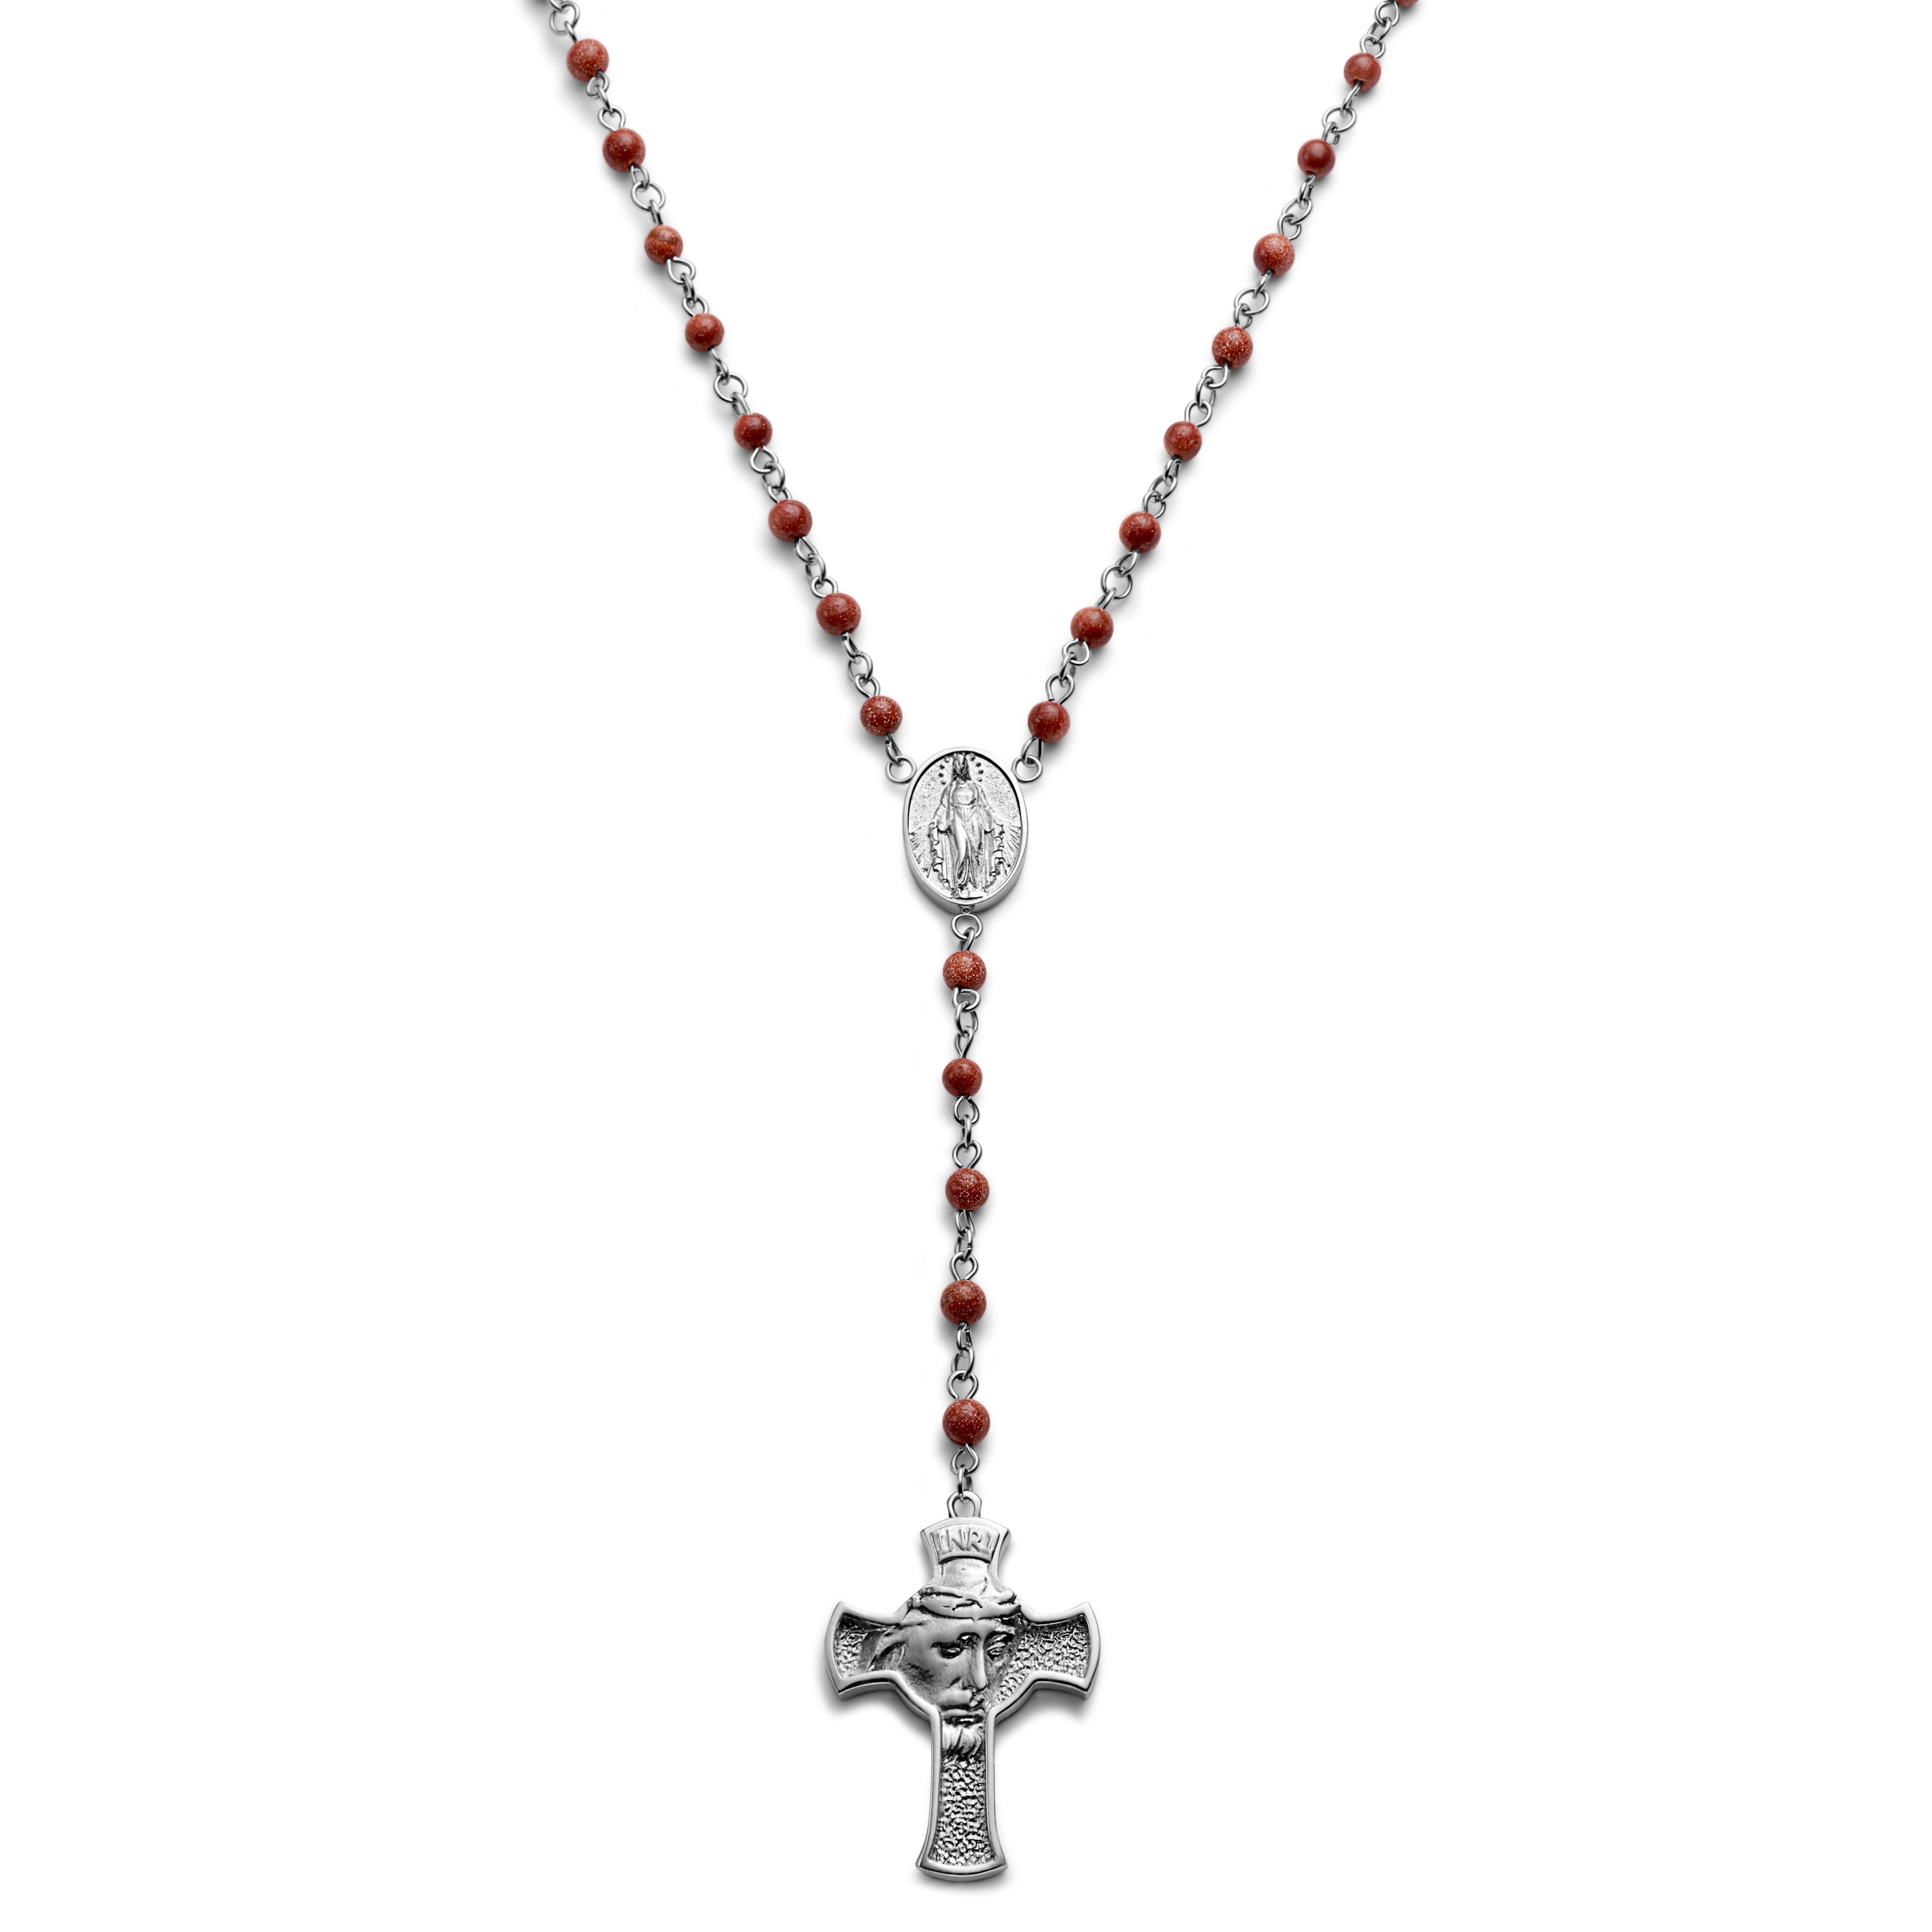 Buy Religious Jewelry and Gifts Online | Rosarycard.net